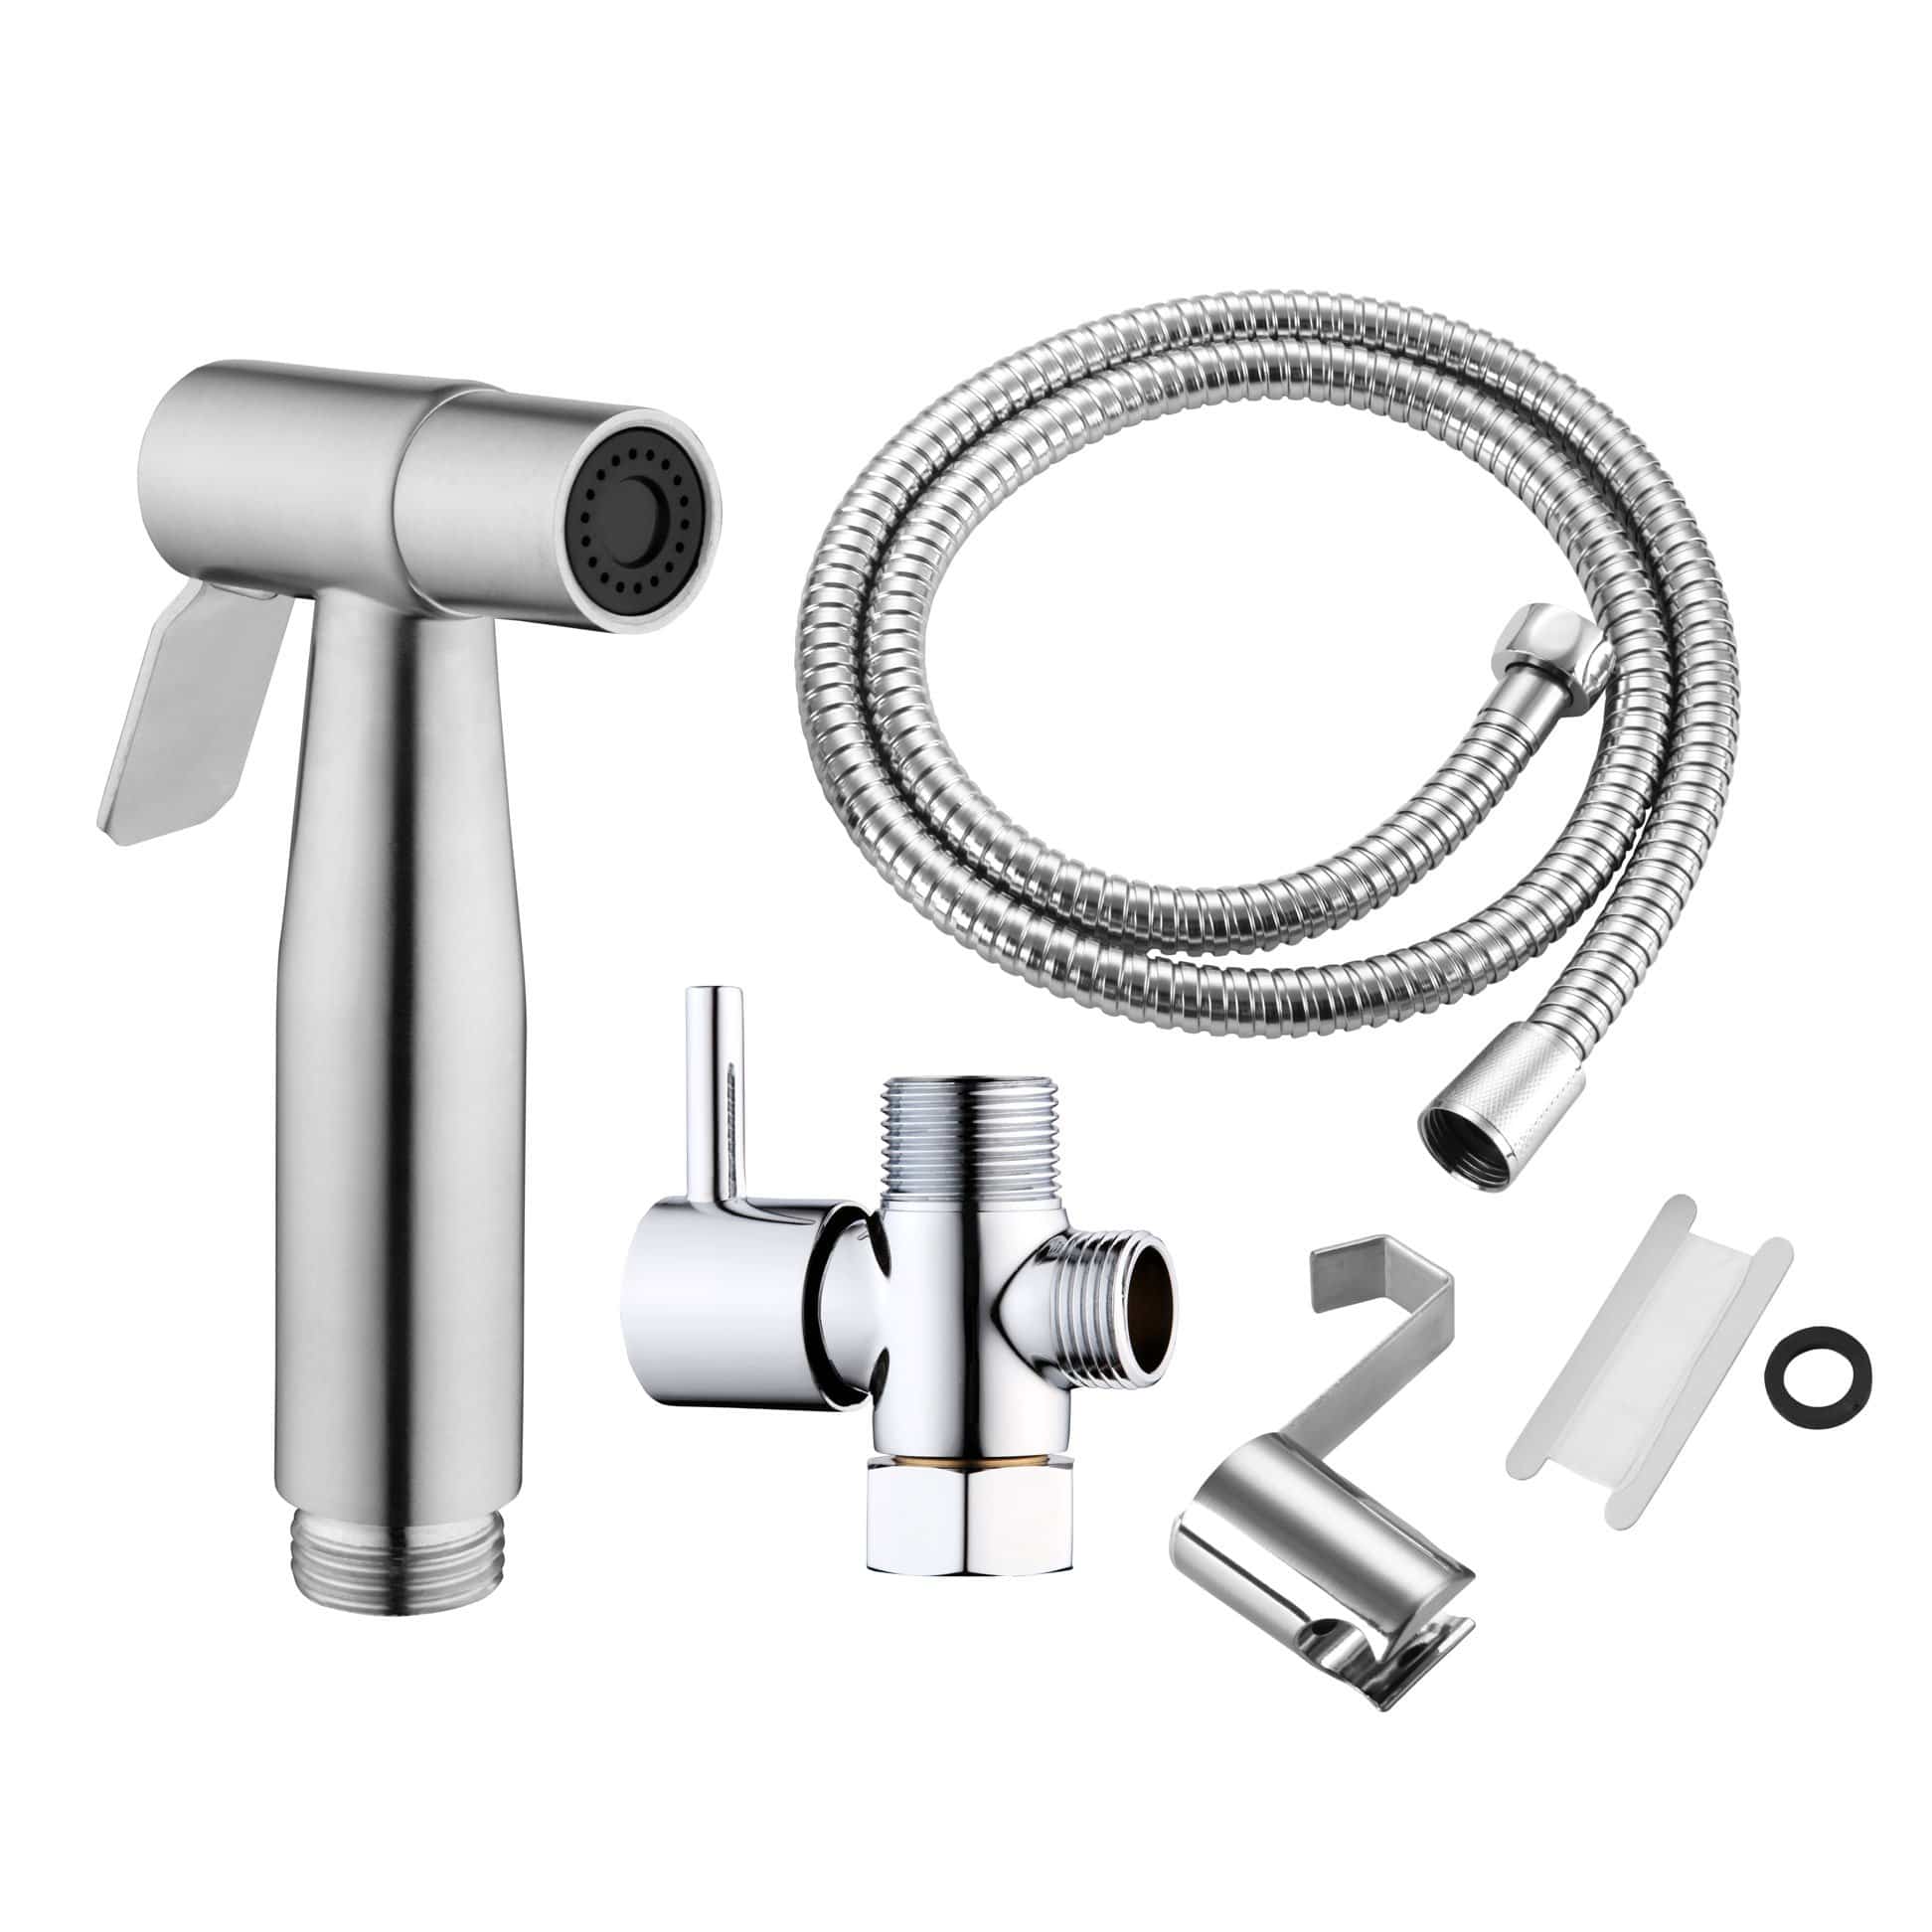 All parts included with the Handheld Bidet LUXE 95 (Nickel)